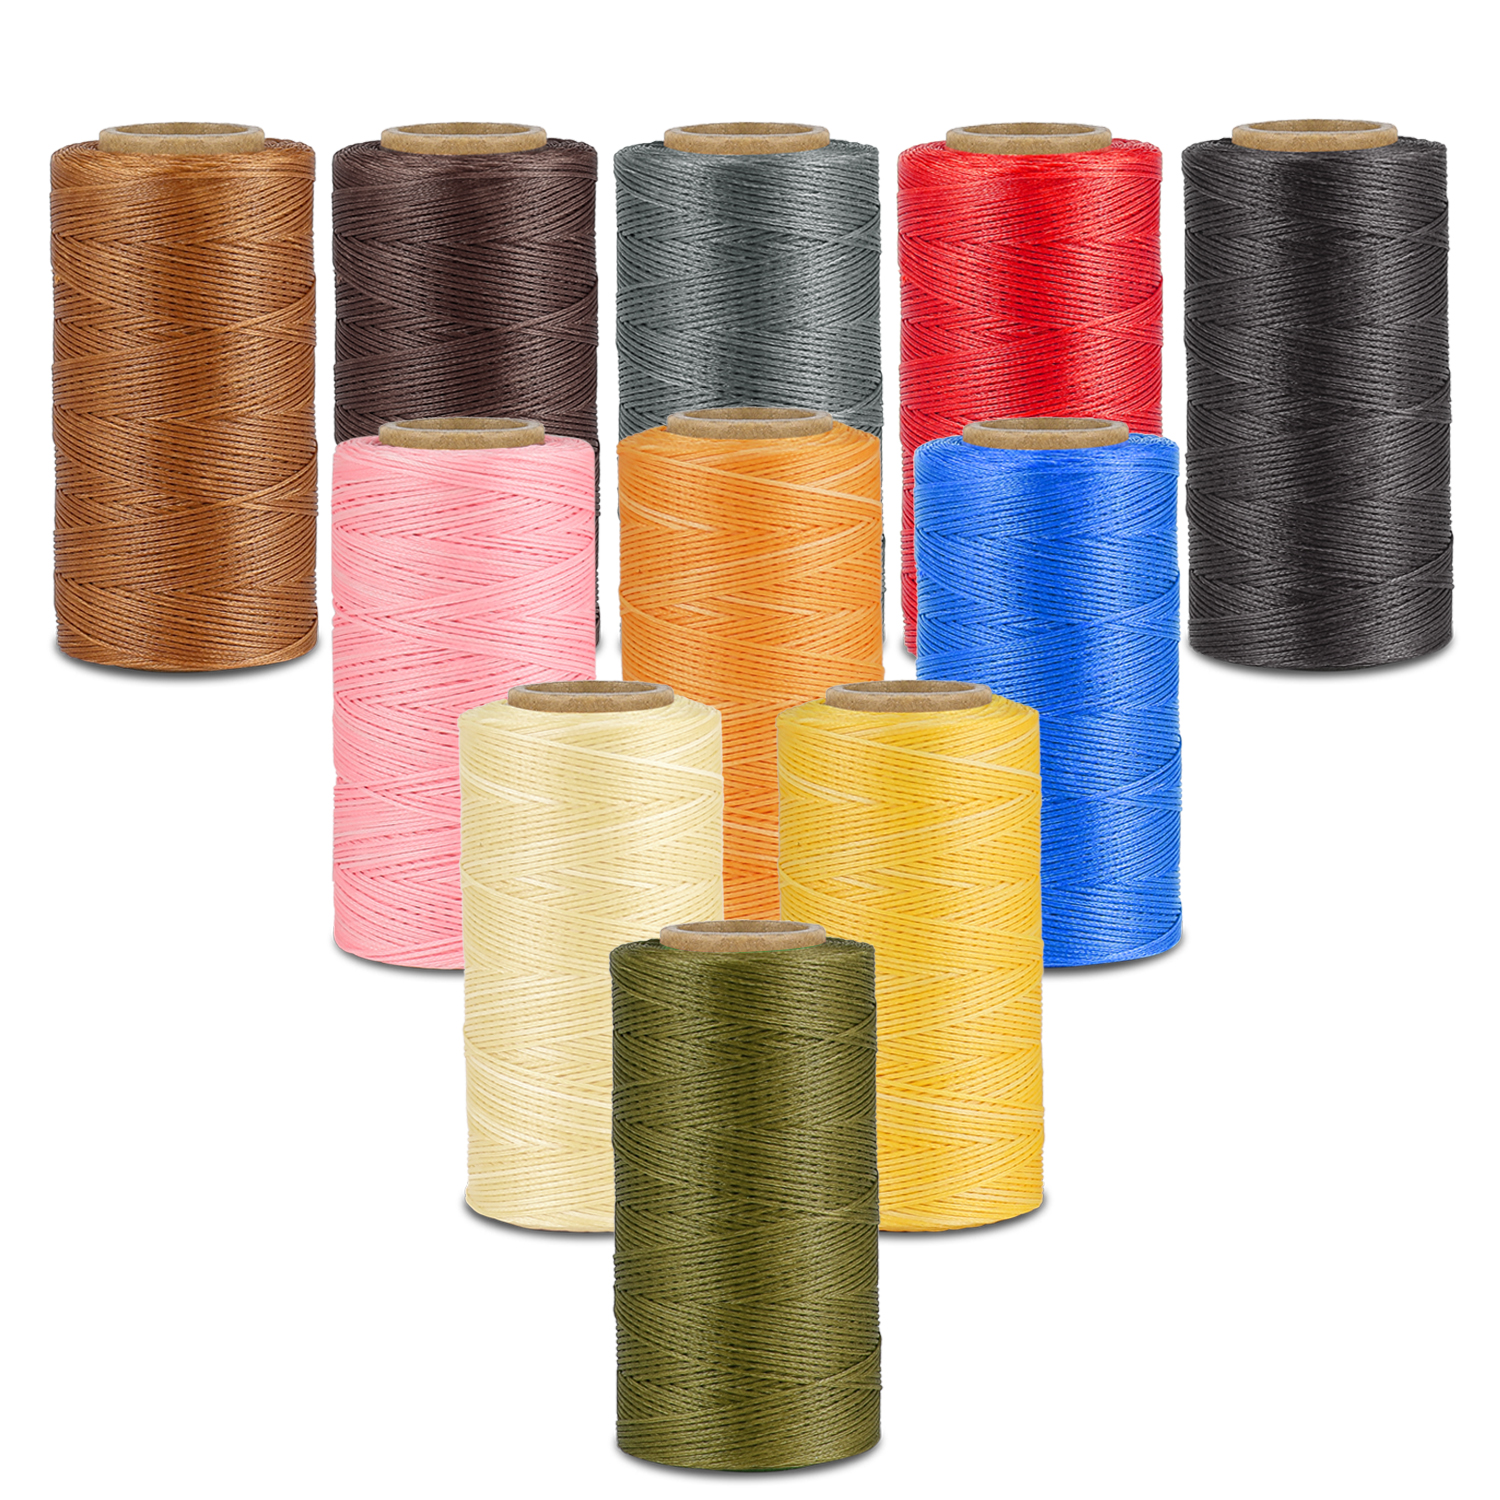 Flexzion Waxed Thread, Wax String, Coated Cord Heavy Duty Polyester 284Yard 1mm 150D Olive Drab Color for Bracelets, Leather Craft Stitching Sewing